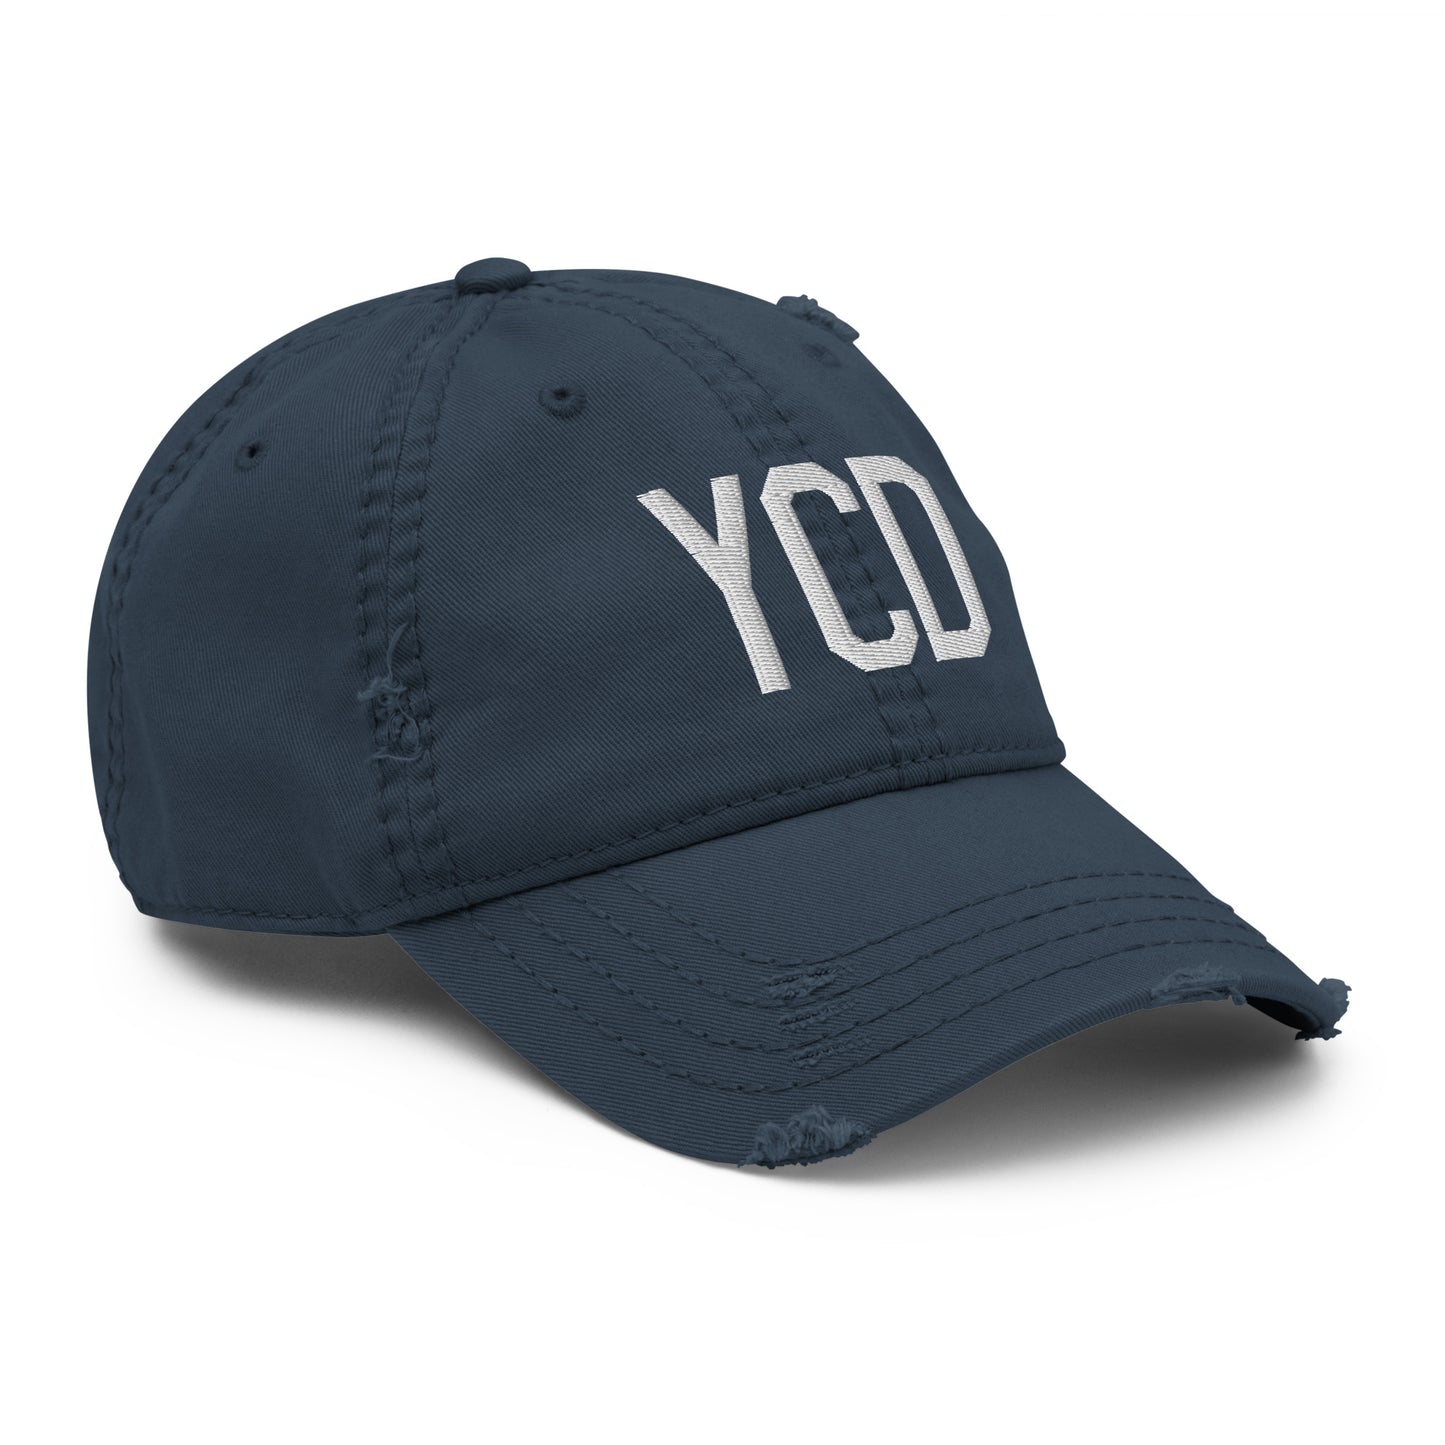 Airport Code Distressed Hat - White • YCD Nanaimo • YHM Designs - Image 14